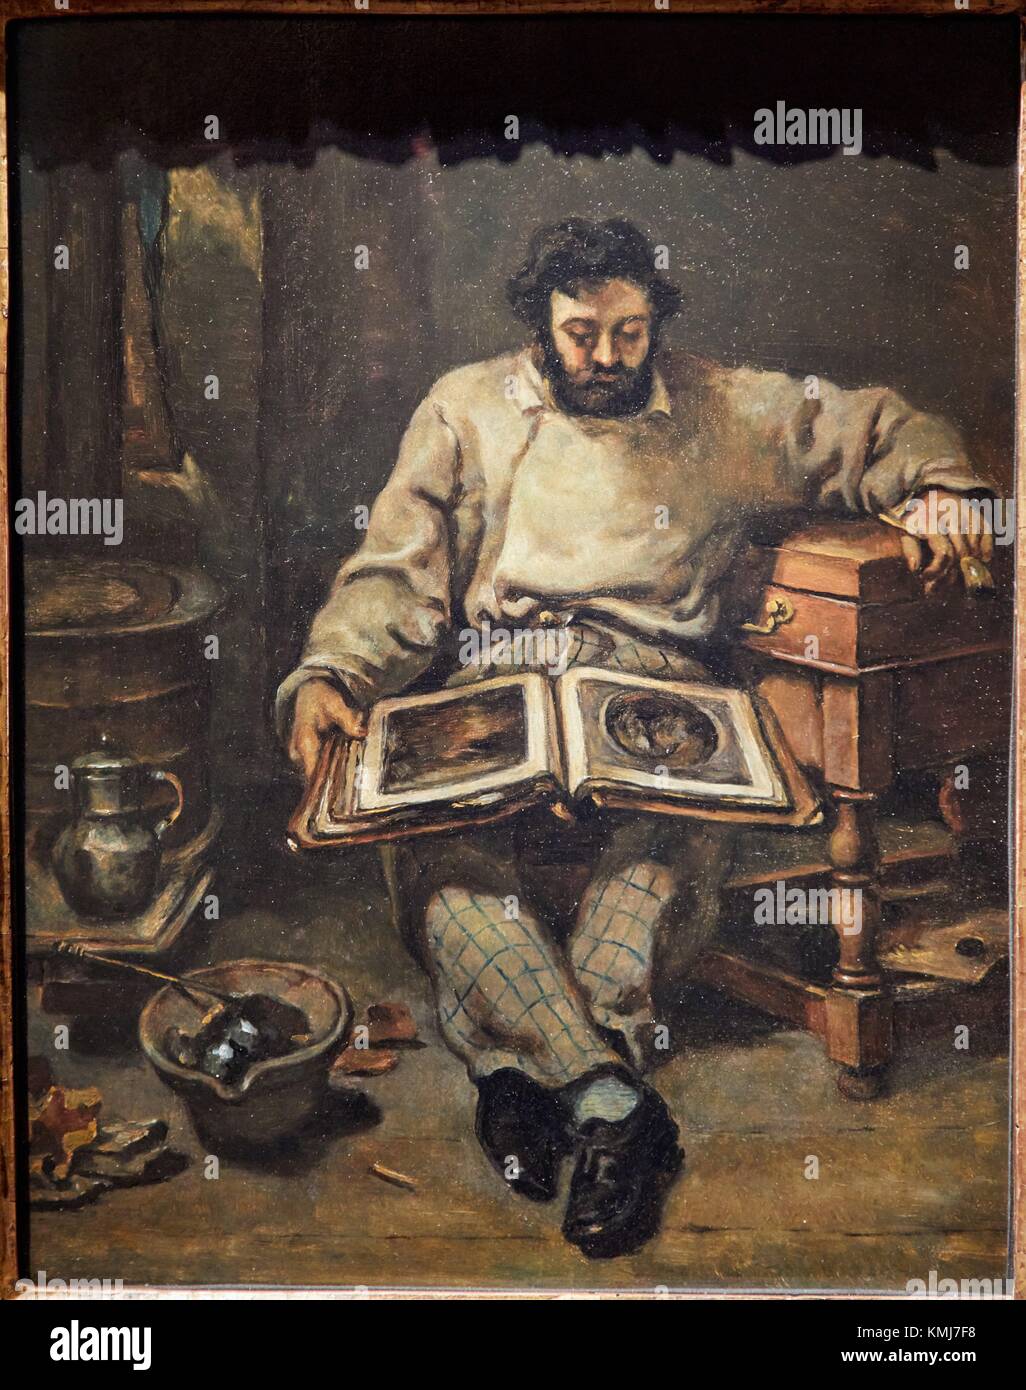 Marc Trapadoux Examining a Book of Prints, Gustave Courbet, 1849, Musée d'Art Moderne, Troyes, Champagne-Ardenne Region, Aube Department, France, Stock Photo